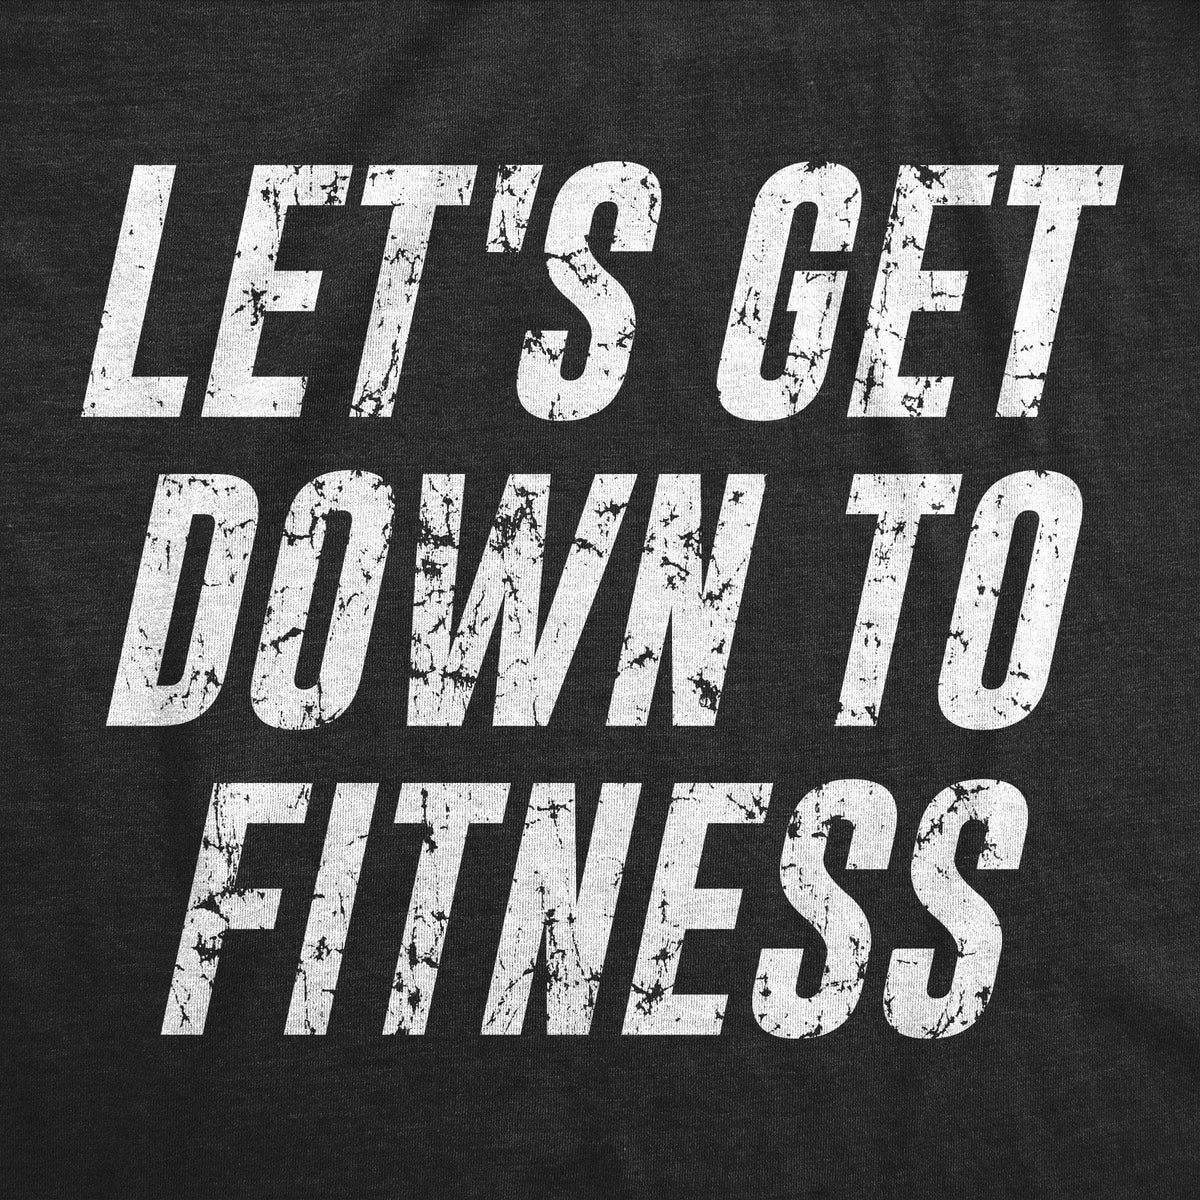 Let&#39;s Get Down To Fitness Women&#39;s Tank Top - Crazy Dog T-Shirts